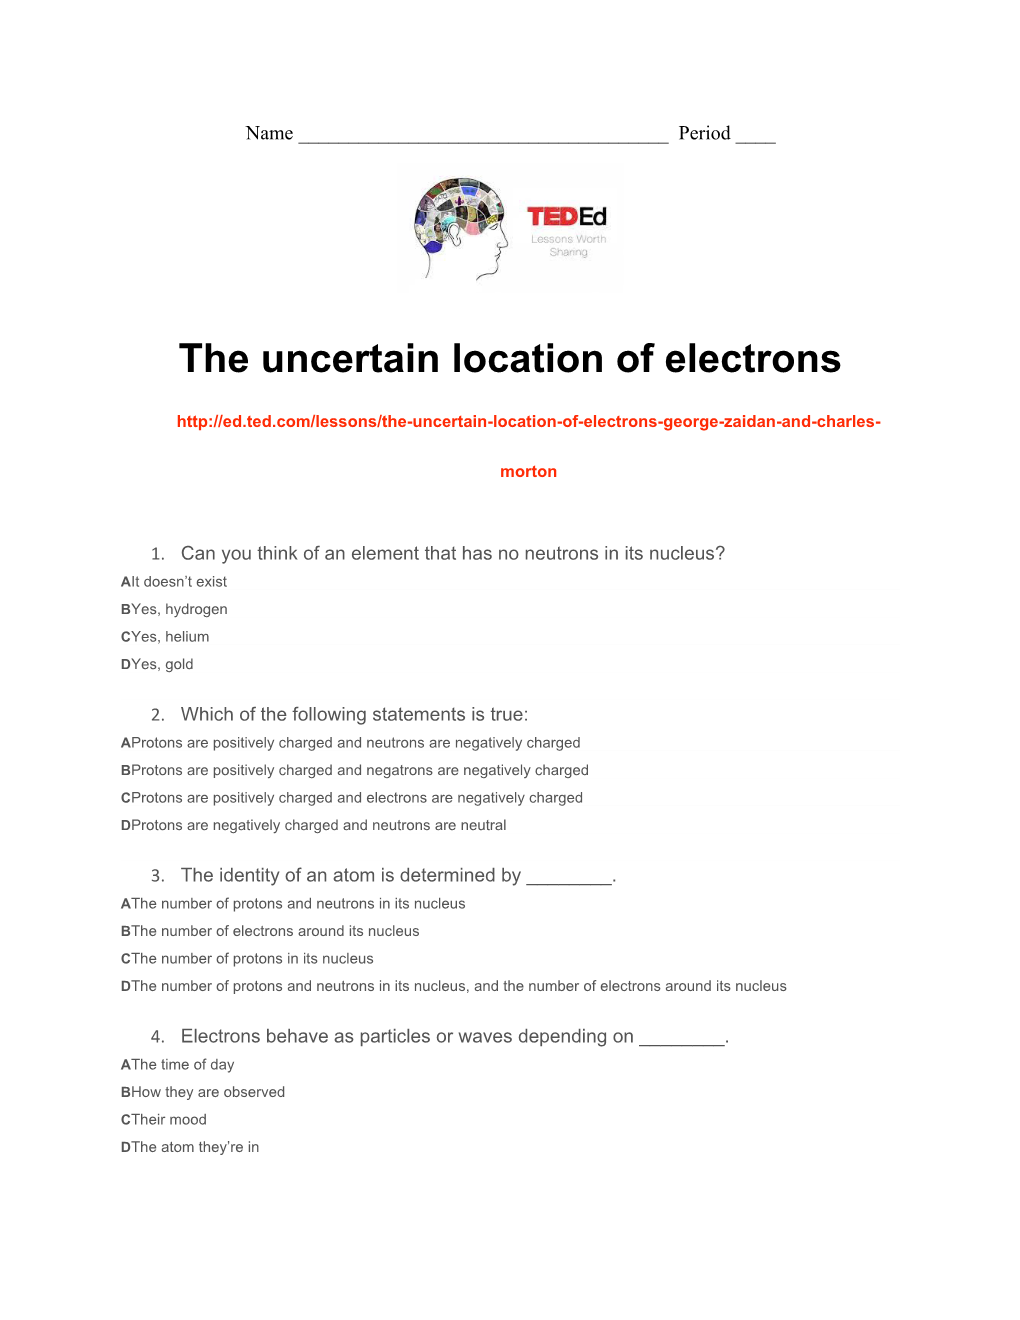 The Uncertain Location of Electrons